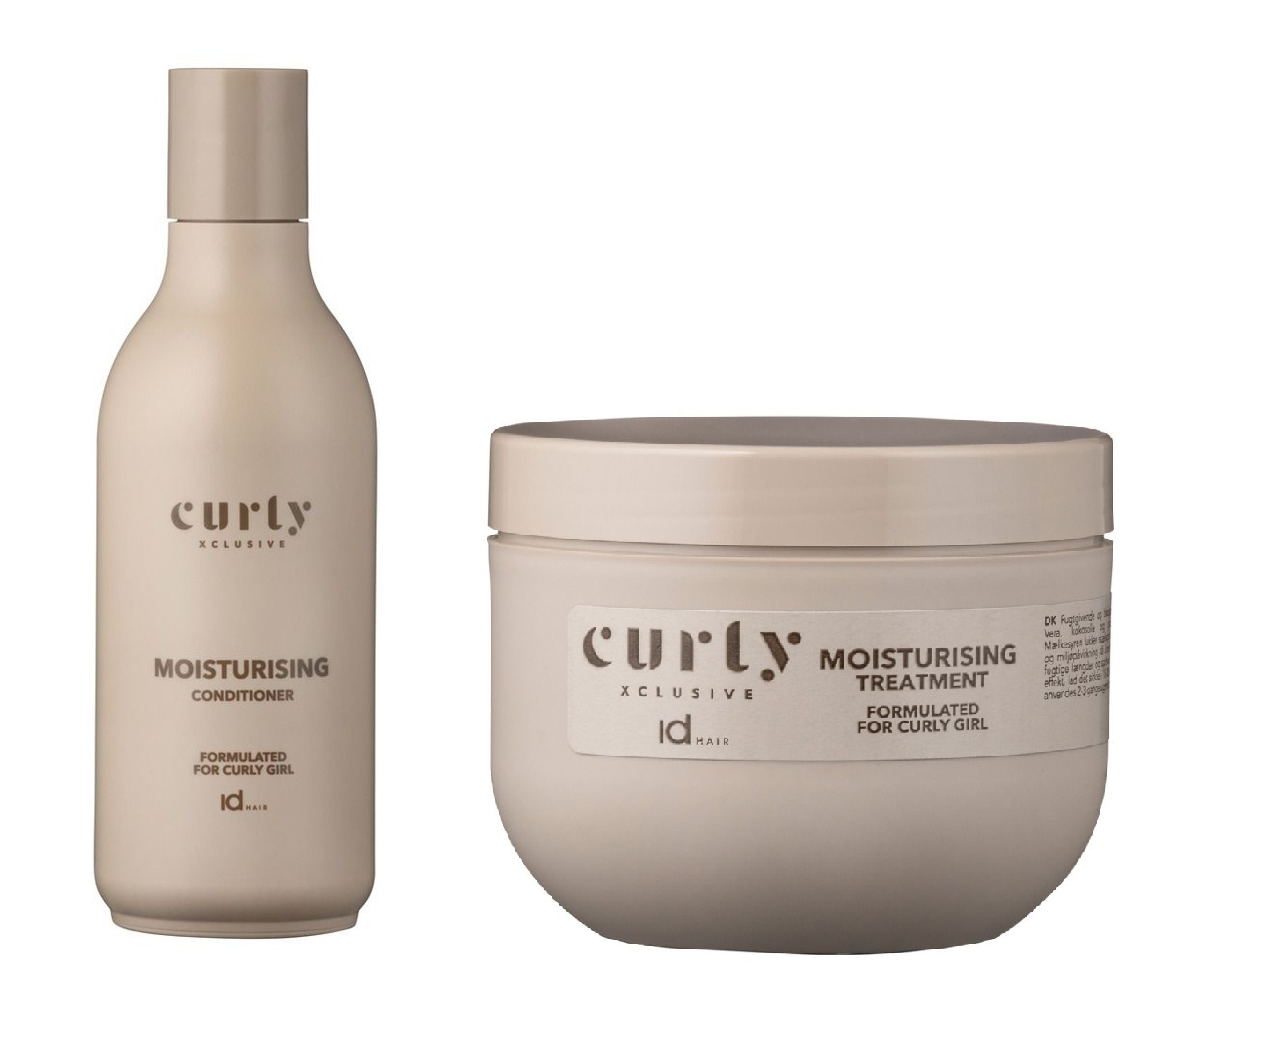 IdHAIR - Curly Xclusive Moisture Conditioner 250 ml + IdHAIR - Curly Xclusive Moisture Treatment 200 ml